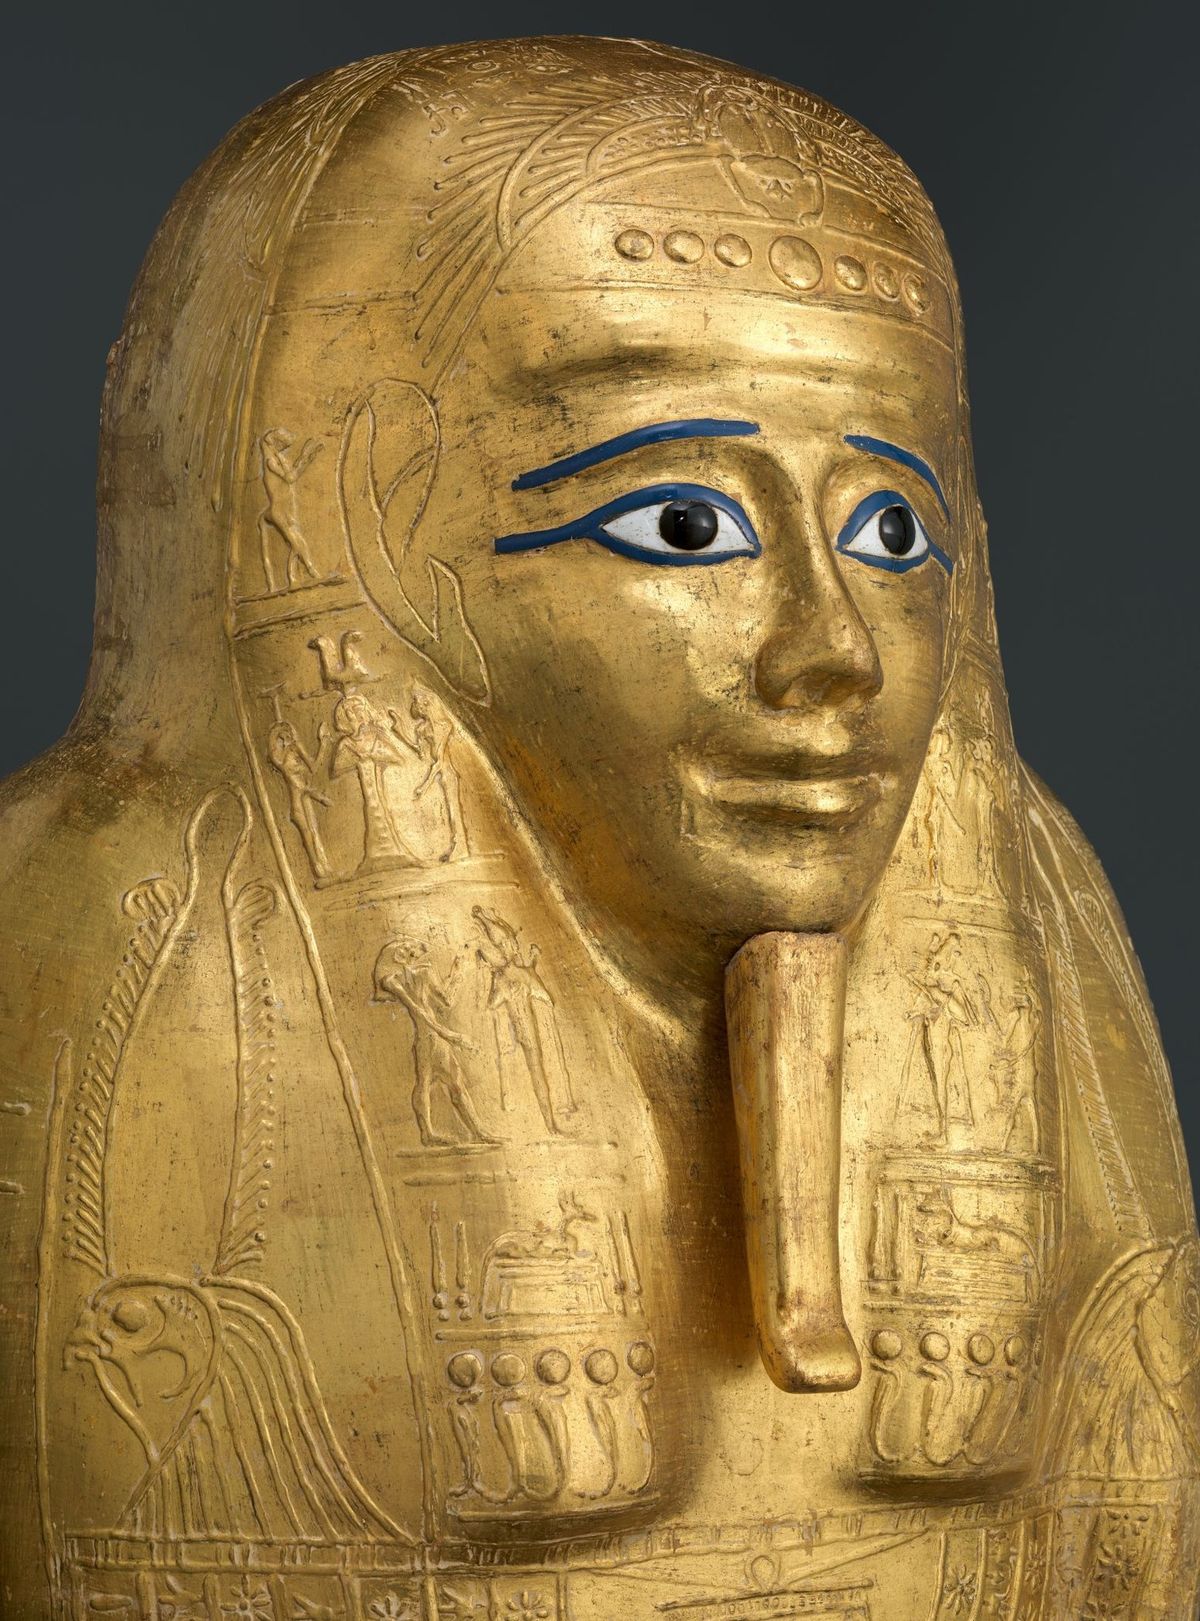 The first-century BC coffin of Nedjemankh, which was returned by the Metropolitan Museum of Art in New York to Egypt in 2019, is at the core of the trafficking investigation Image: Metropolitan Museum of Art